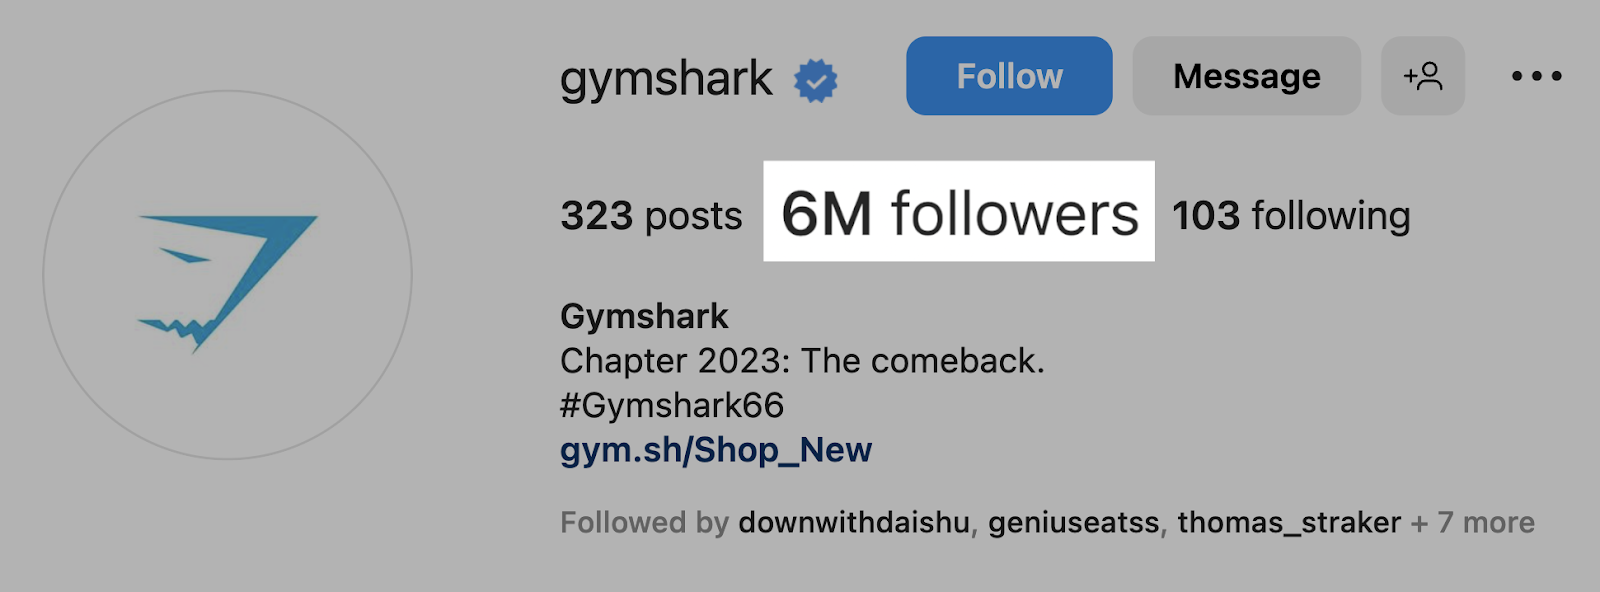 follower numbers highlighted for gymshark